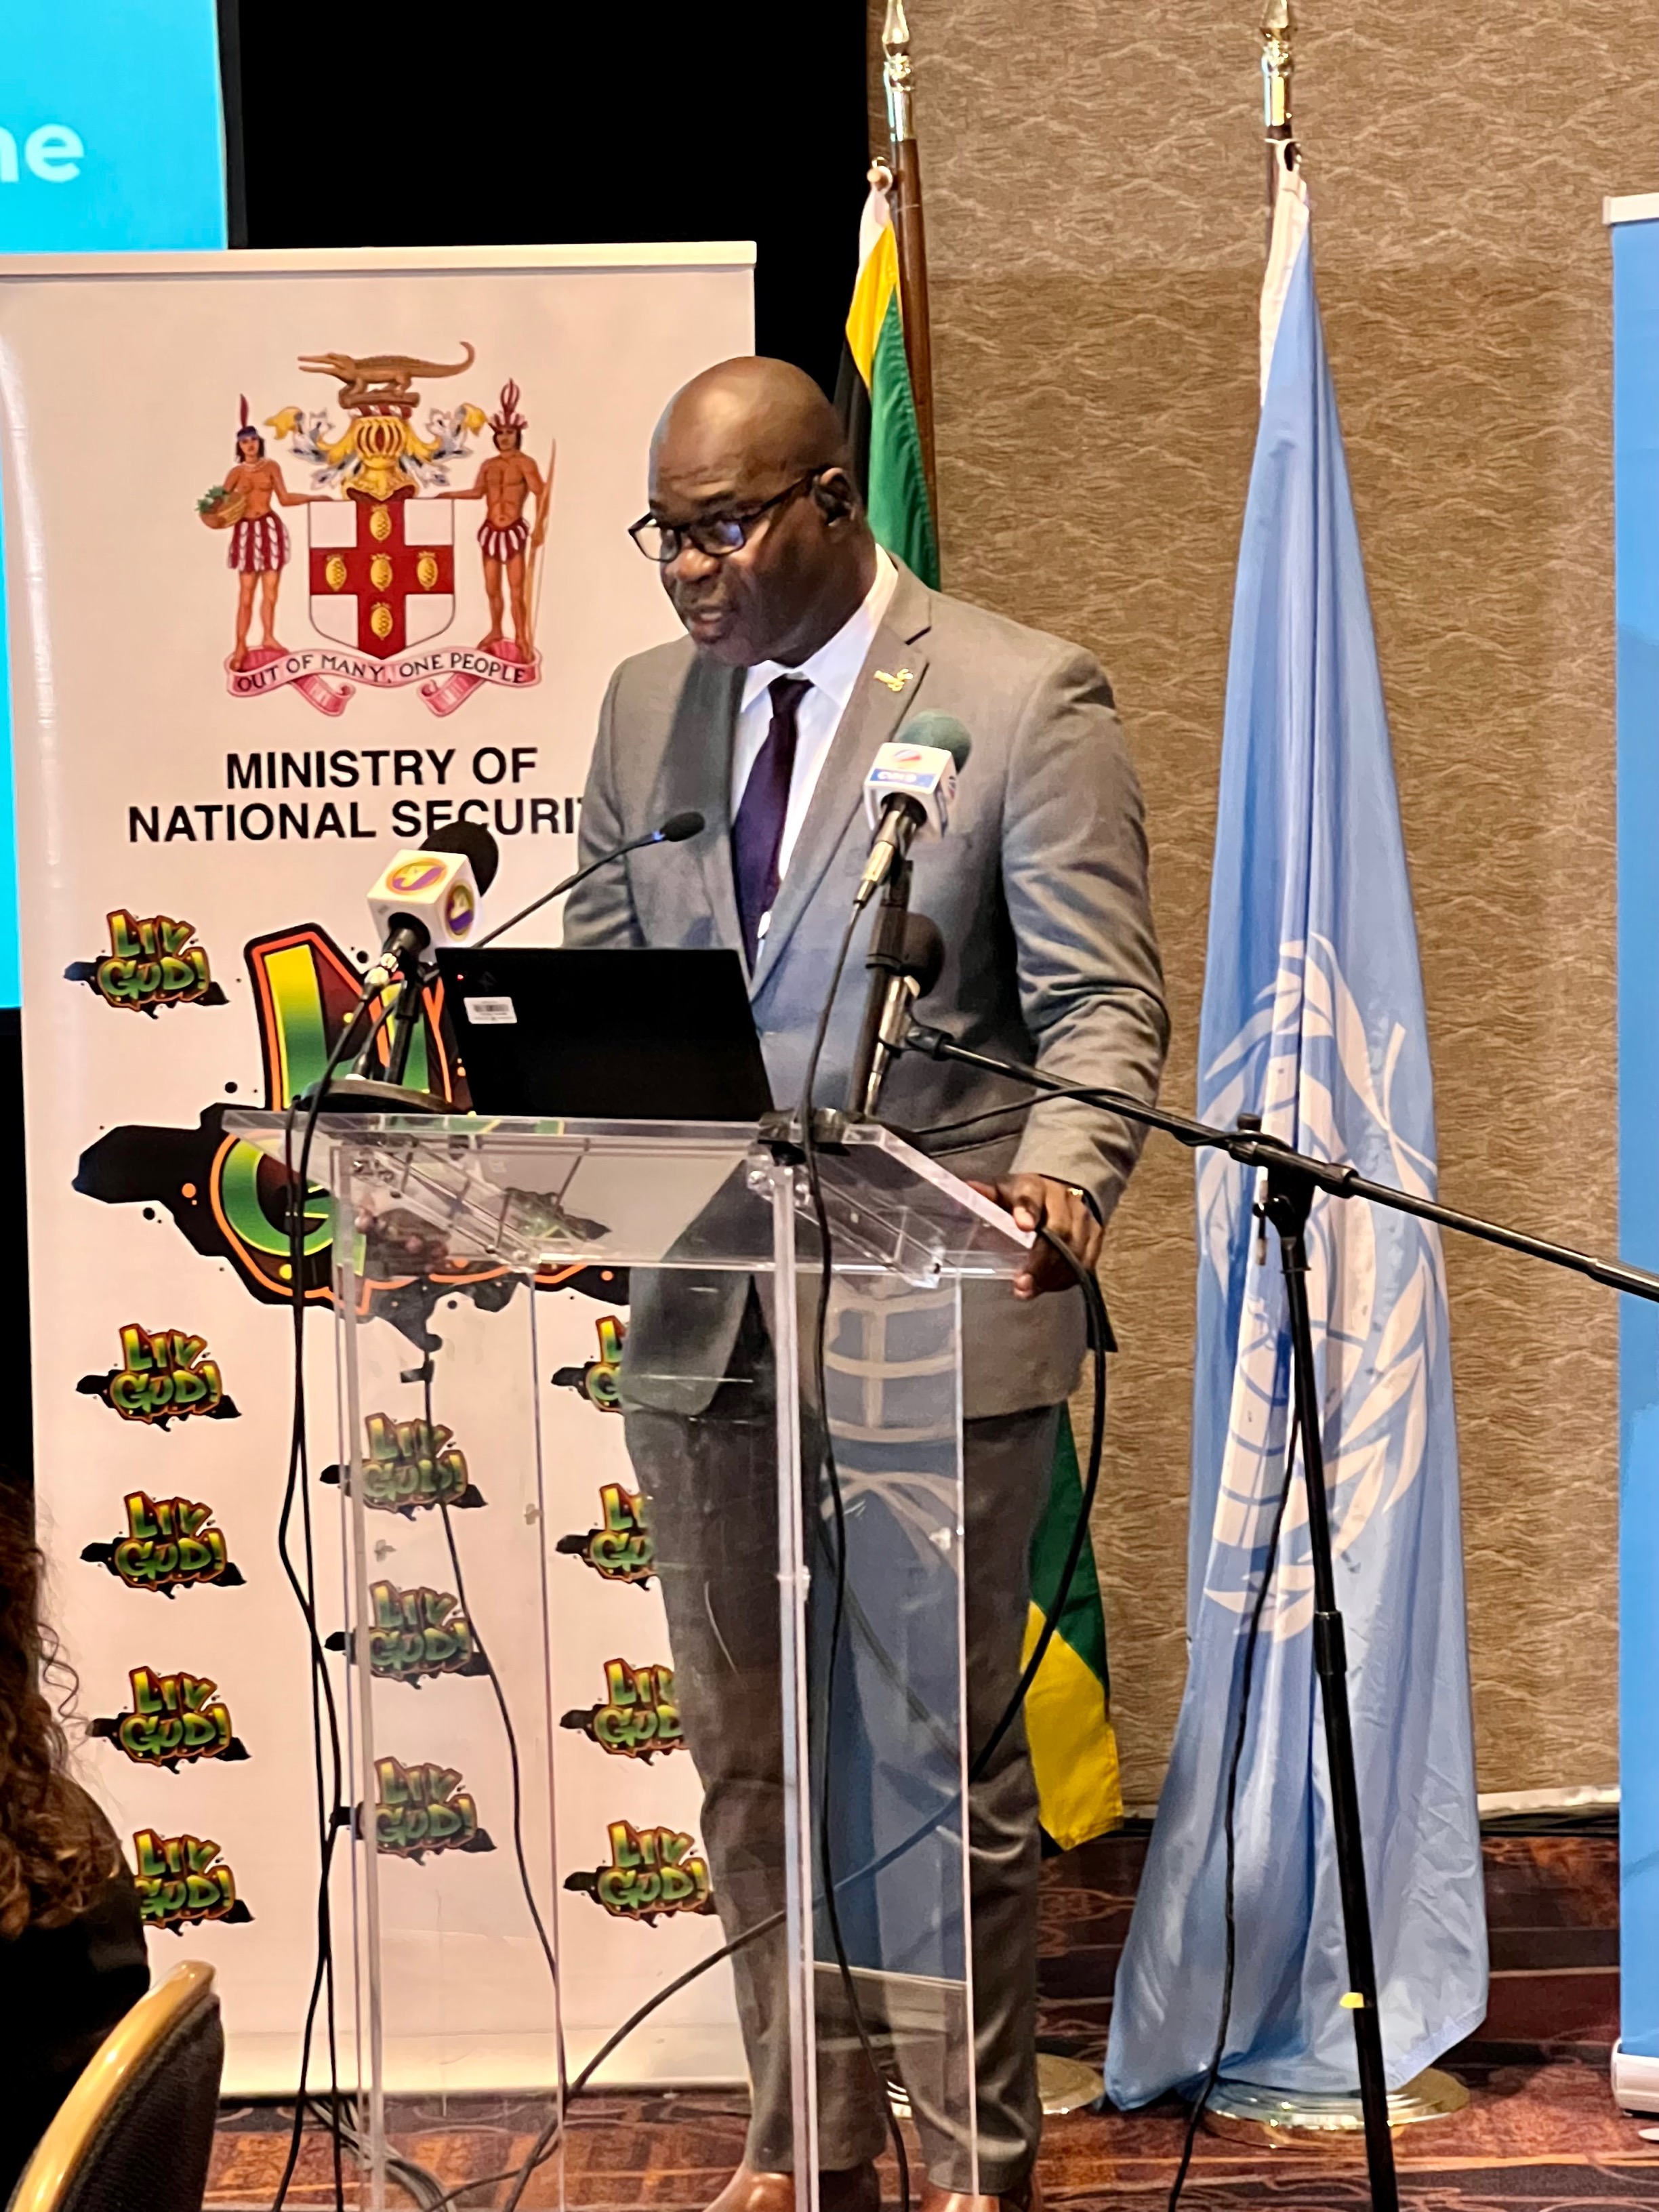 A man speaking behind a podium. On the left side, the roll up banner of Jamaica's Ministry of National Security. Behind him, the flags of Jamaica and of the United Nations.